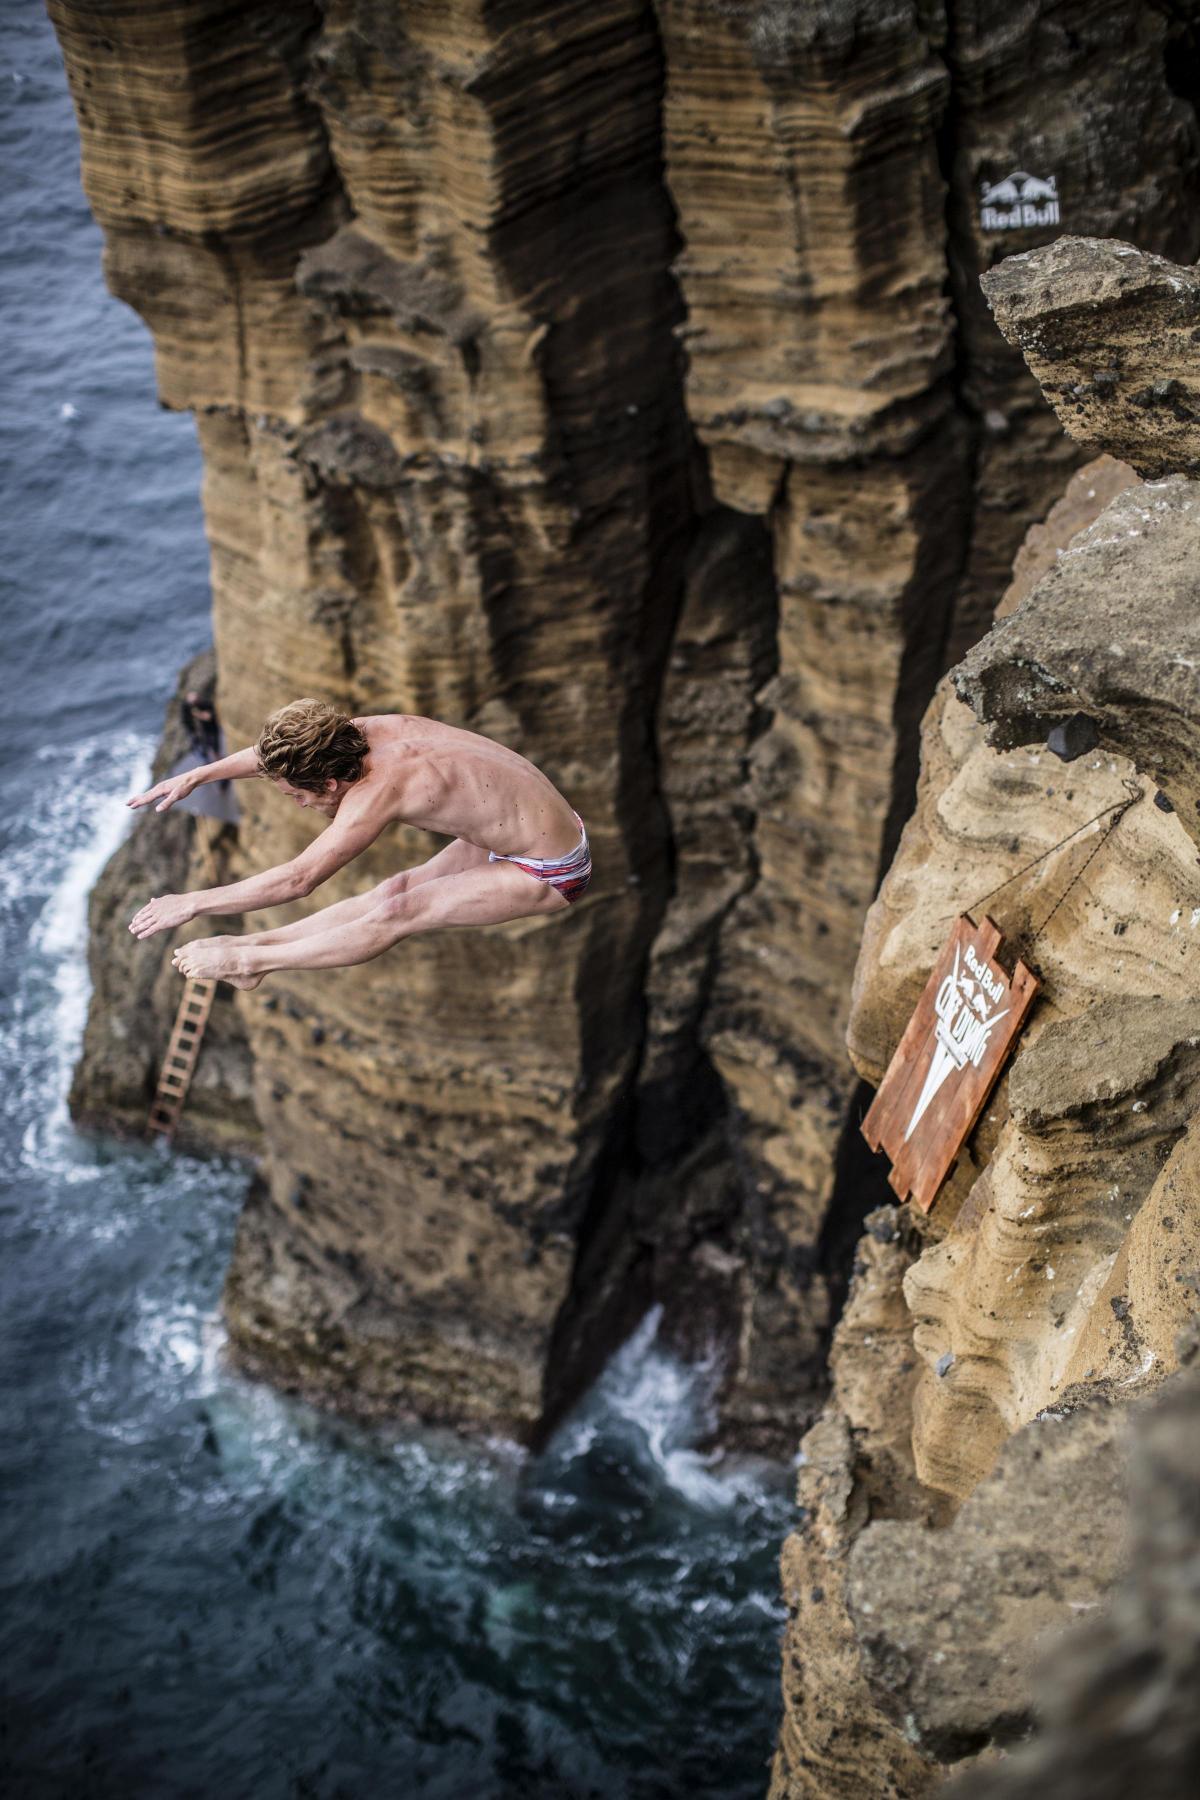 Gary Hunt in Red Bull Cliff Diving World Series